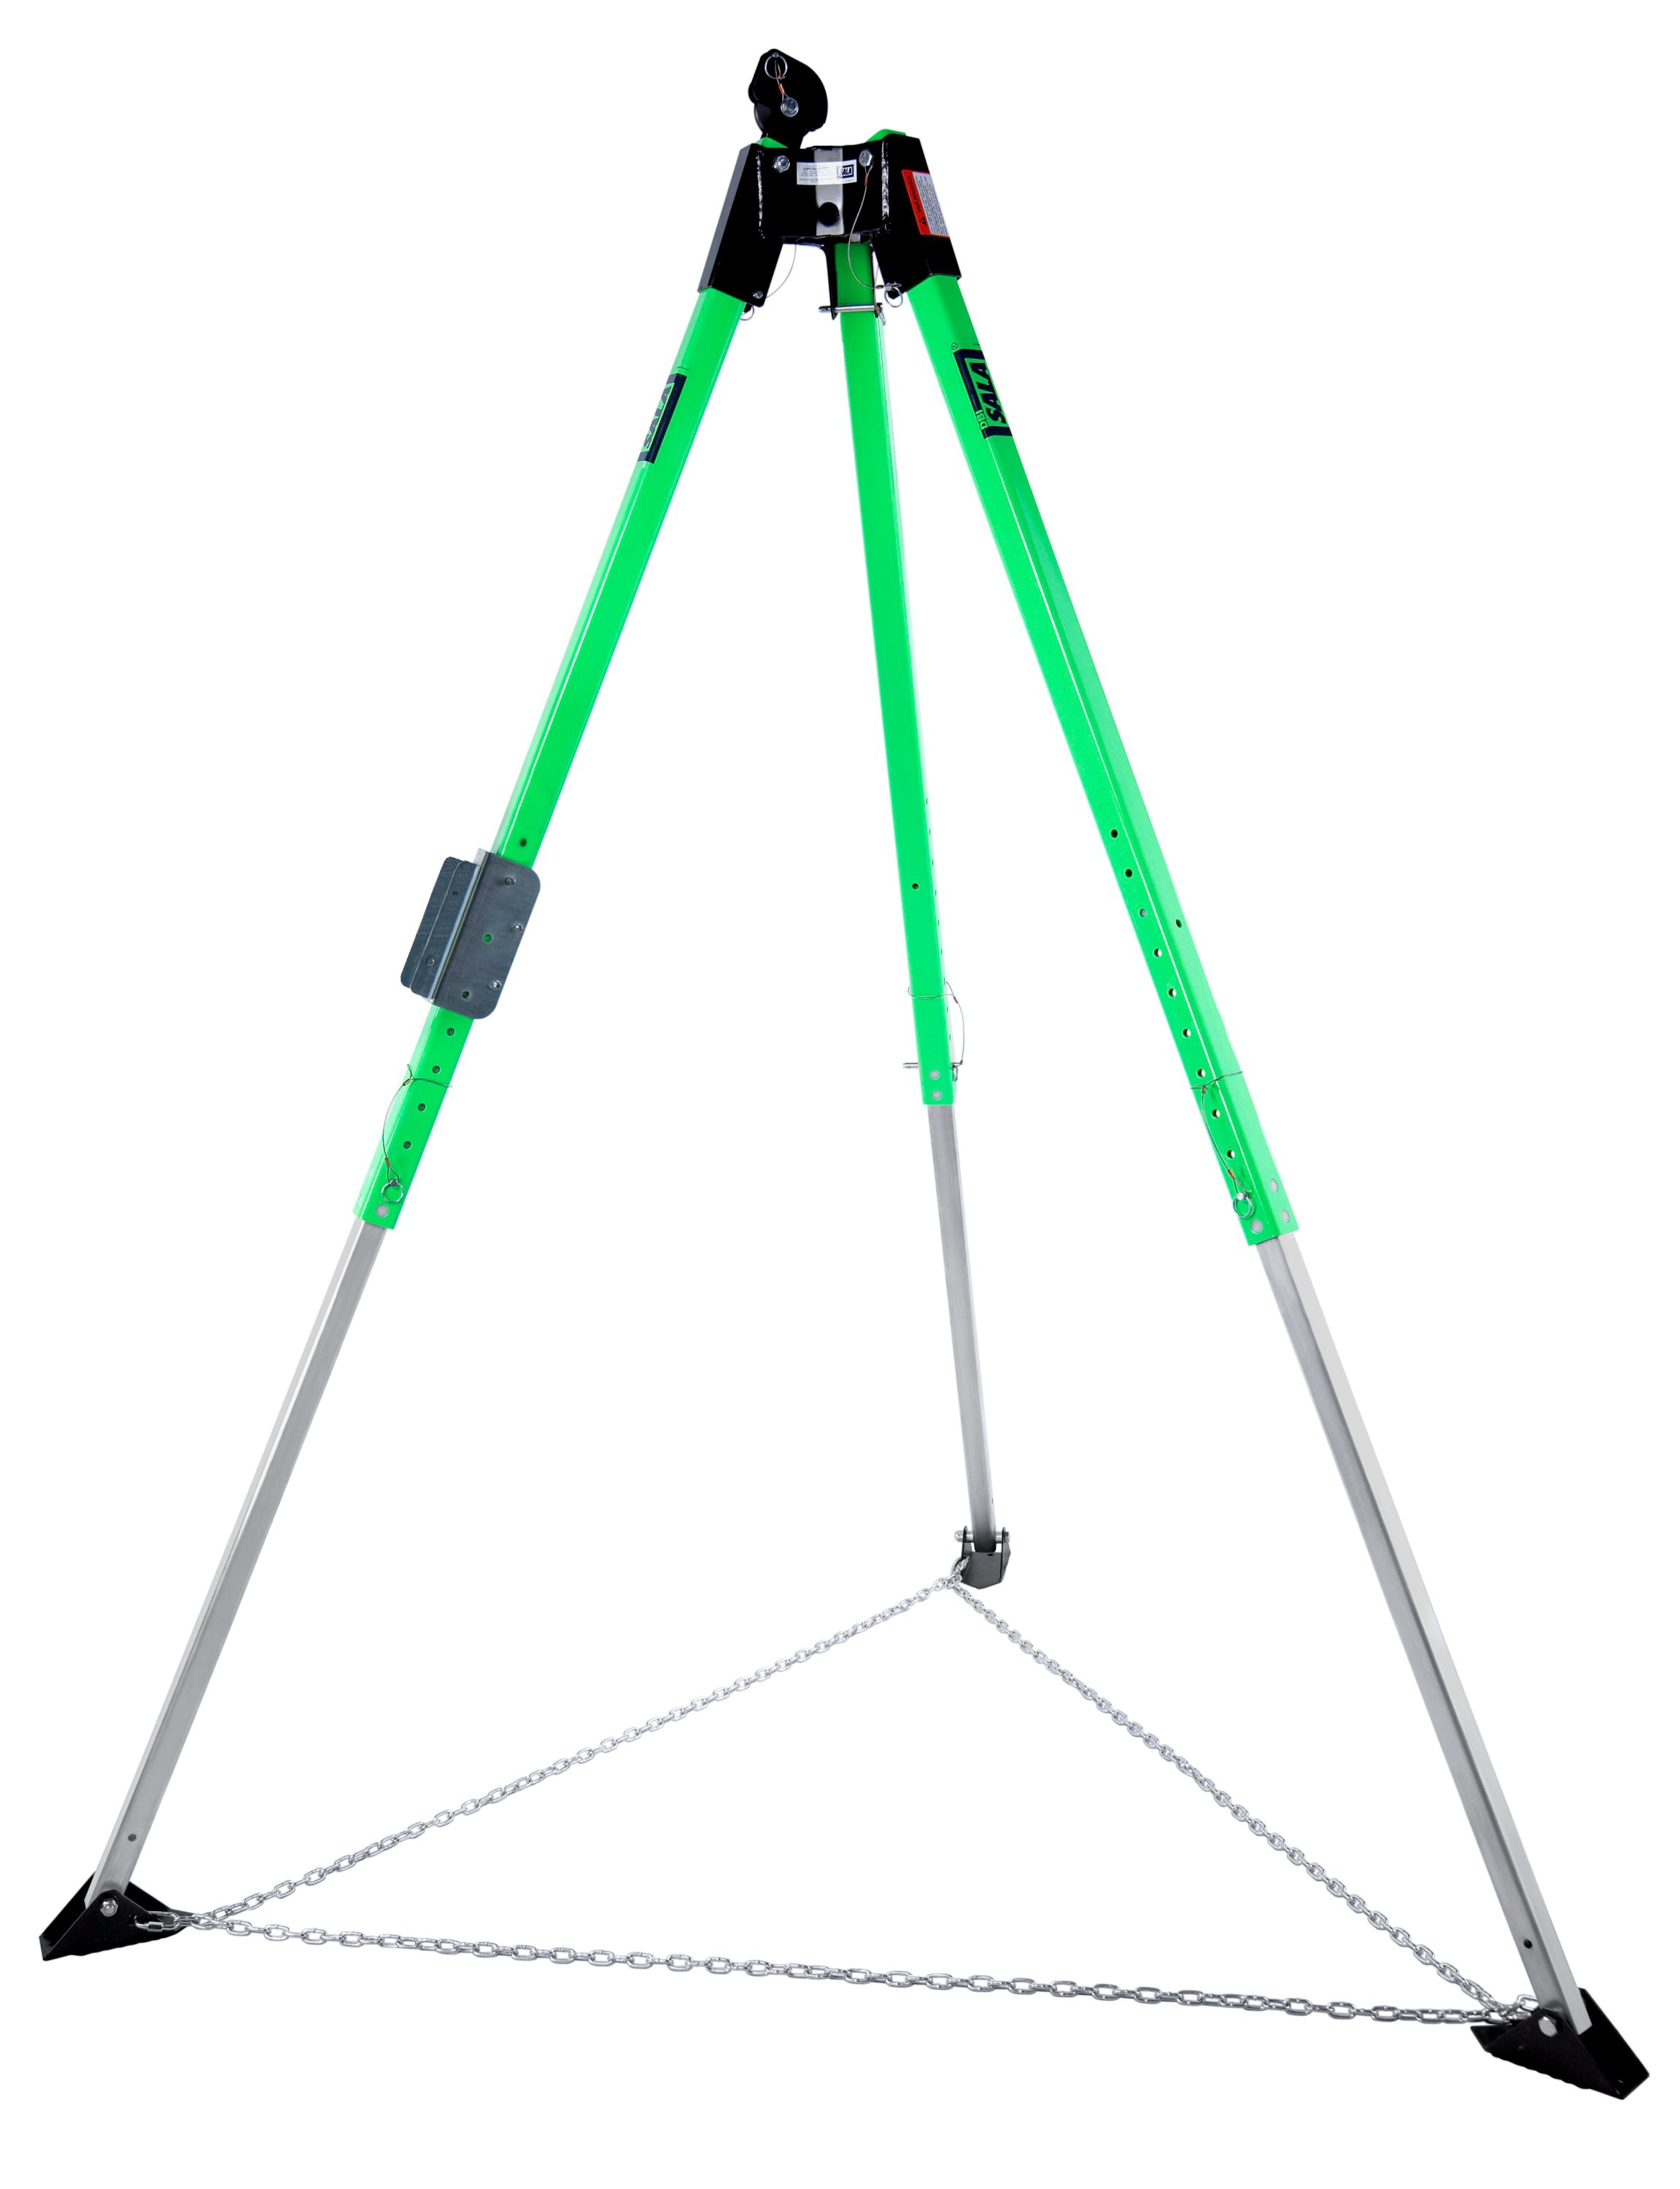 3M DBI-SALA UCT-300 tripod, telescopic legs, incl. guy chain, 1 x pulley and 1 x bracket, height: 1.50 to 2.20 m, span: 1.00 to 1.93 m, max. 3 pulleys, 3 anchor points , 2.13 m